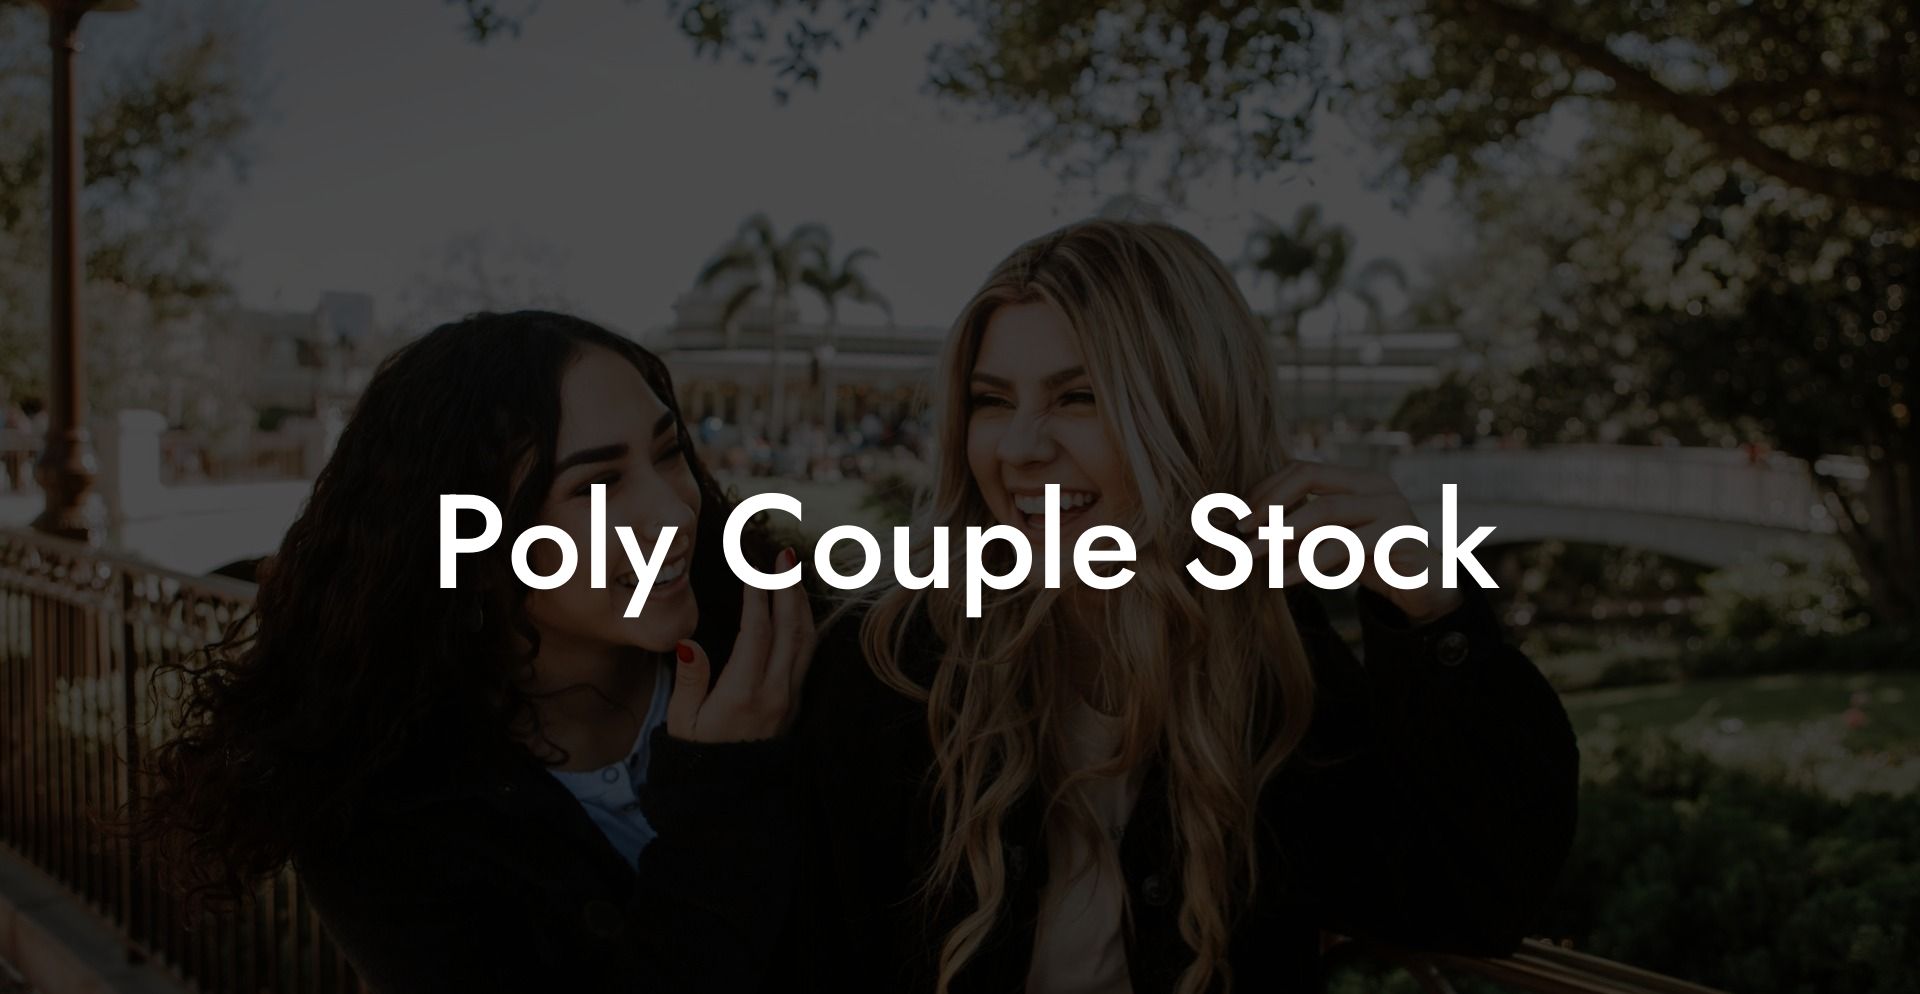 Poly Couple Stock